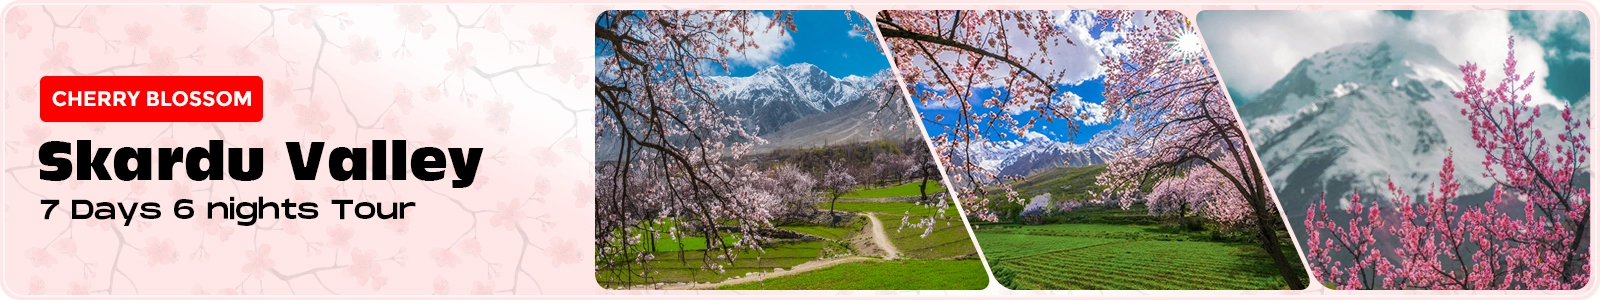 Cherry blossom Skardu tour by road from Islamabad and Lahore